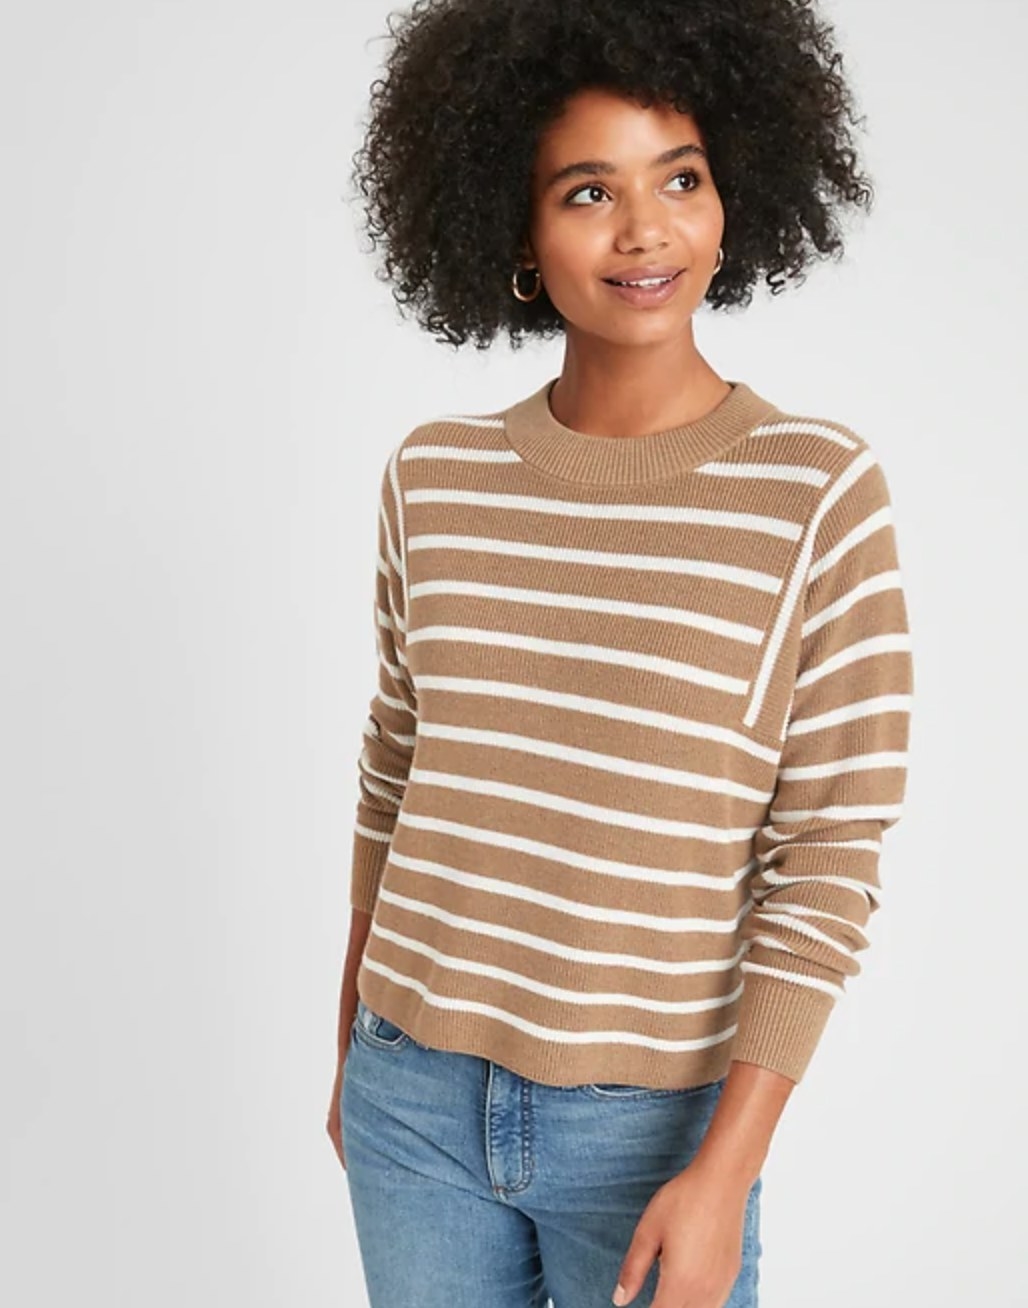 The striped crewneck sweater in camel